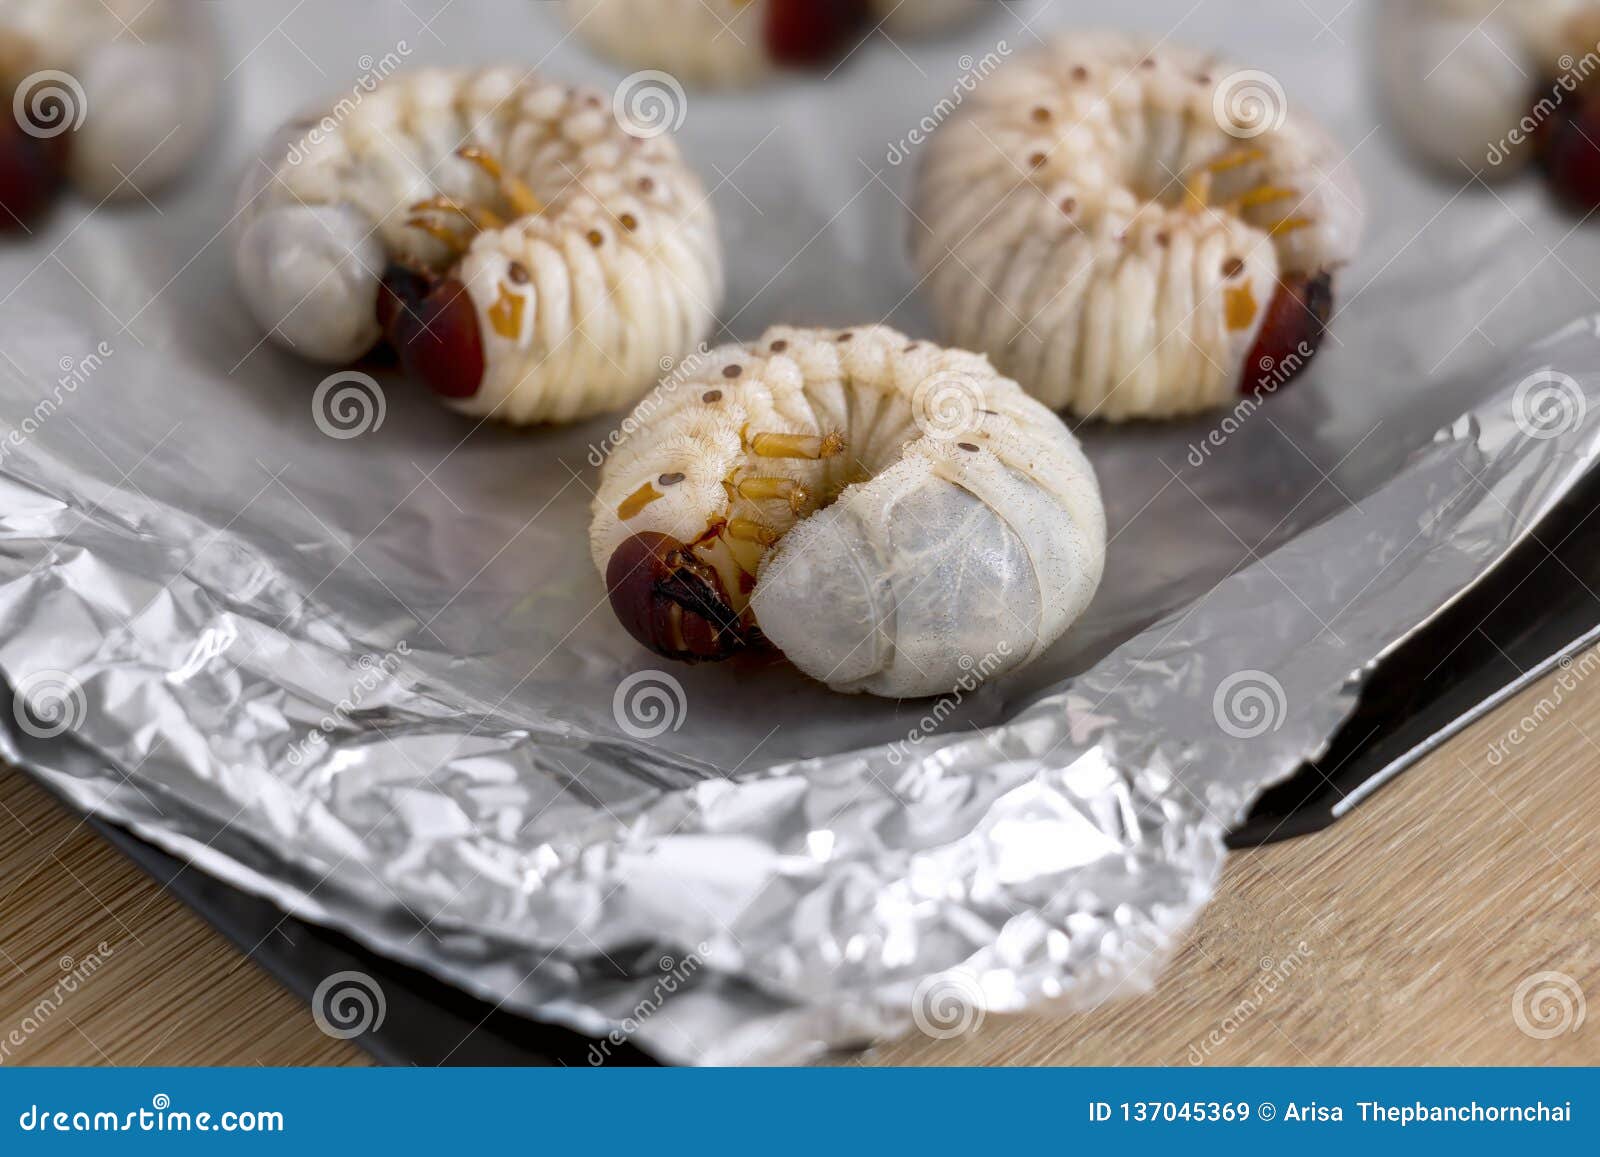 Grub Worms or Coconut Rhinoceros Beetle Oryctes Rhinoceros. Insects Food  for Eating Larvae Fried or Baked on Baking Tray is Goo Stock Image - Image  of coleoptera, future: 137045369